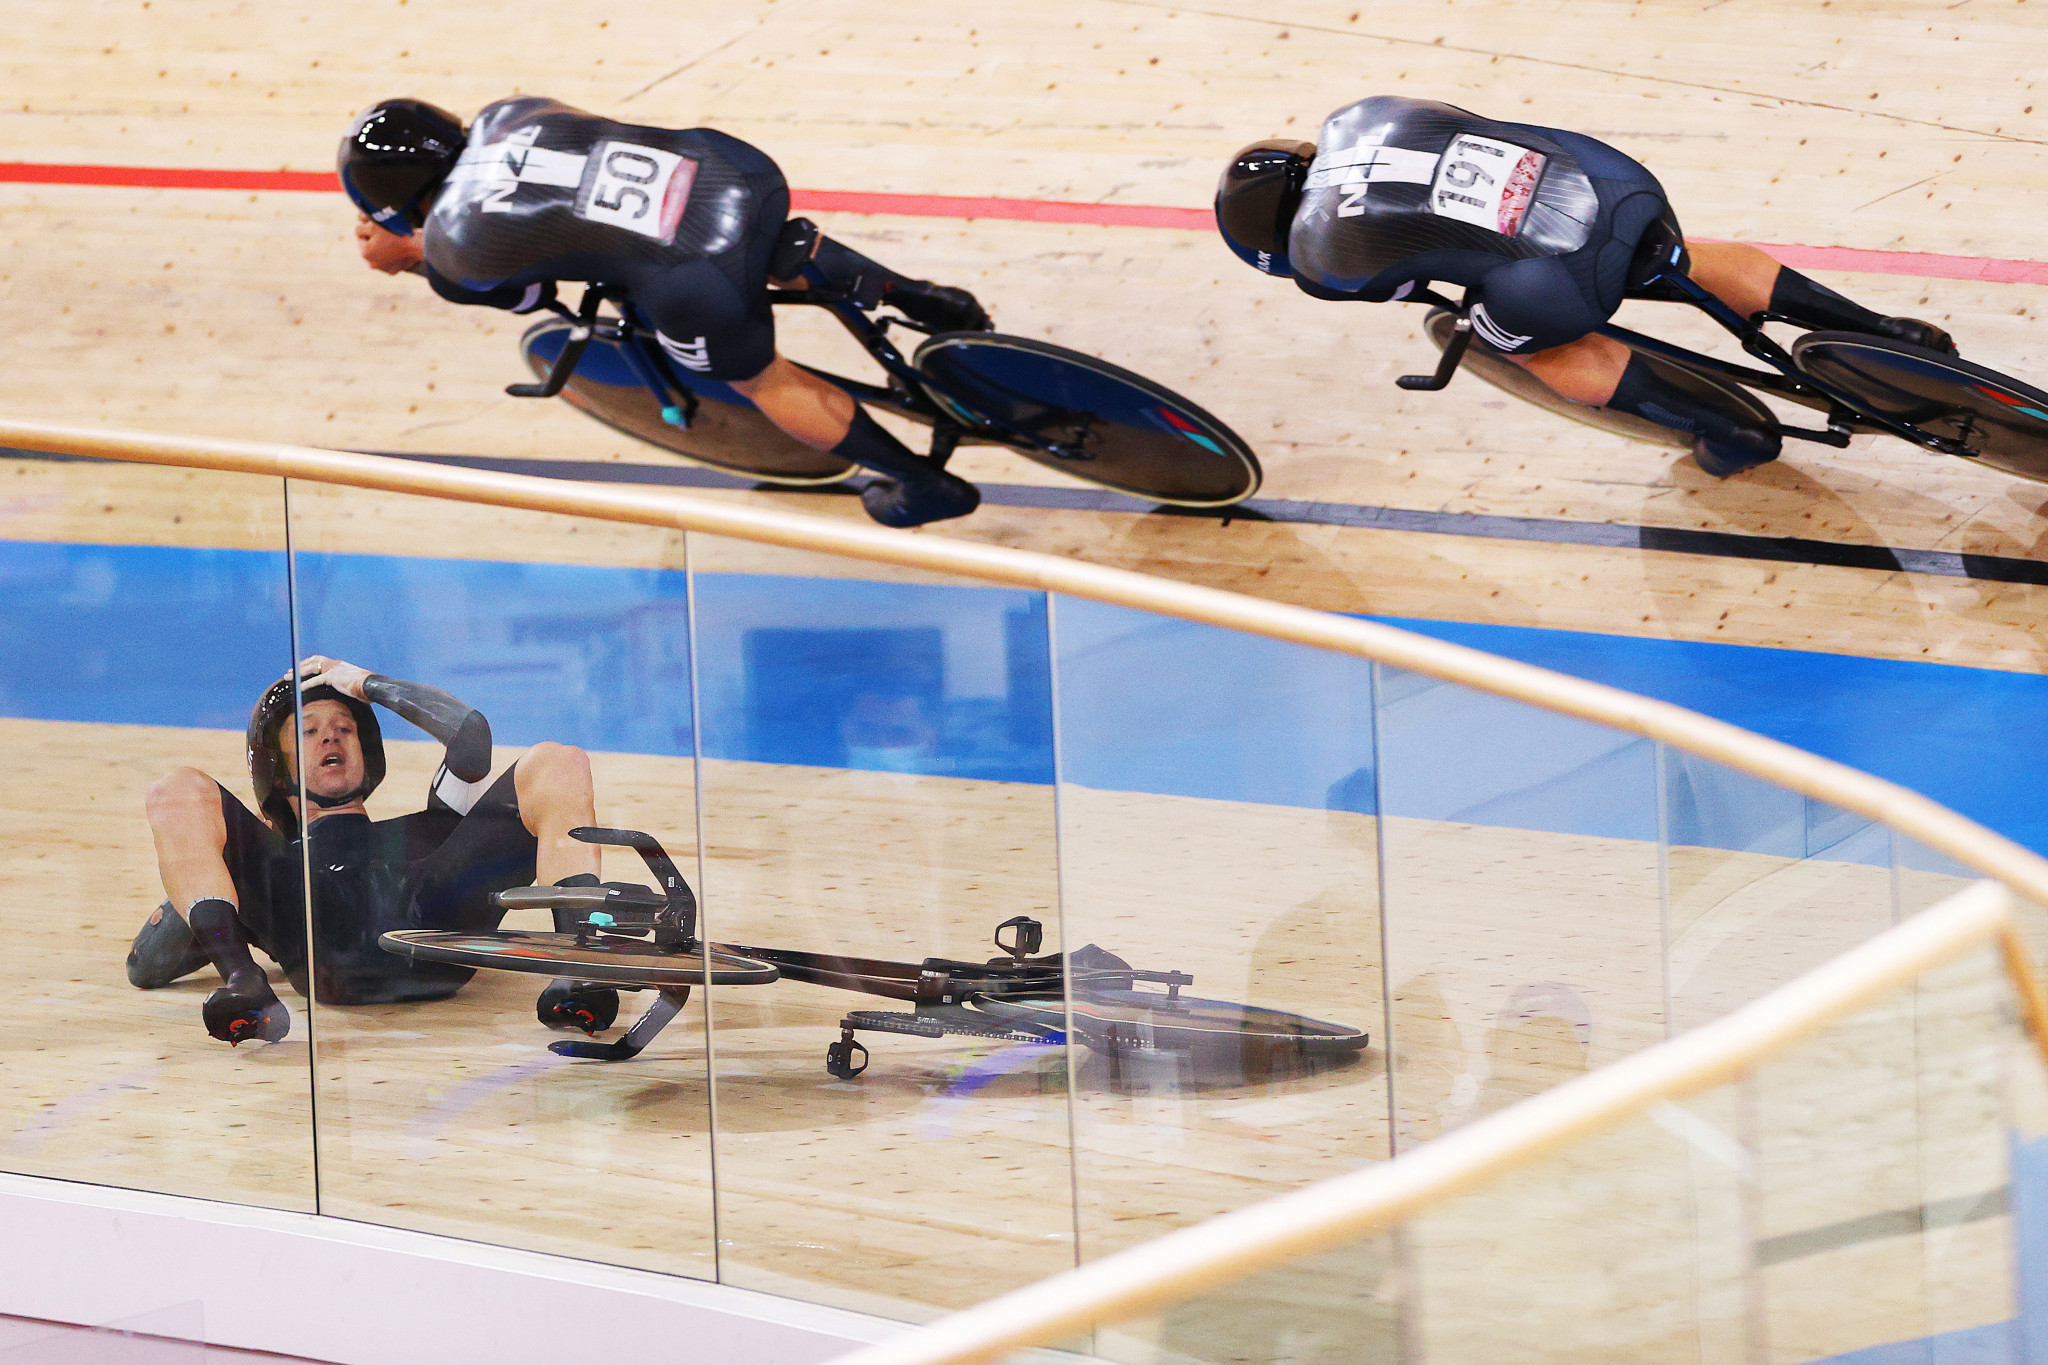 New Zealand's hopes of bronze were ended by a crash ©Getty Images